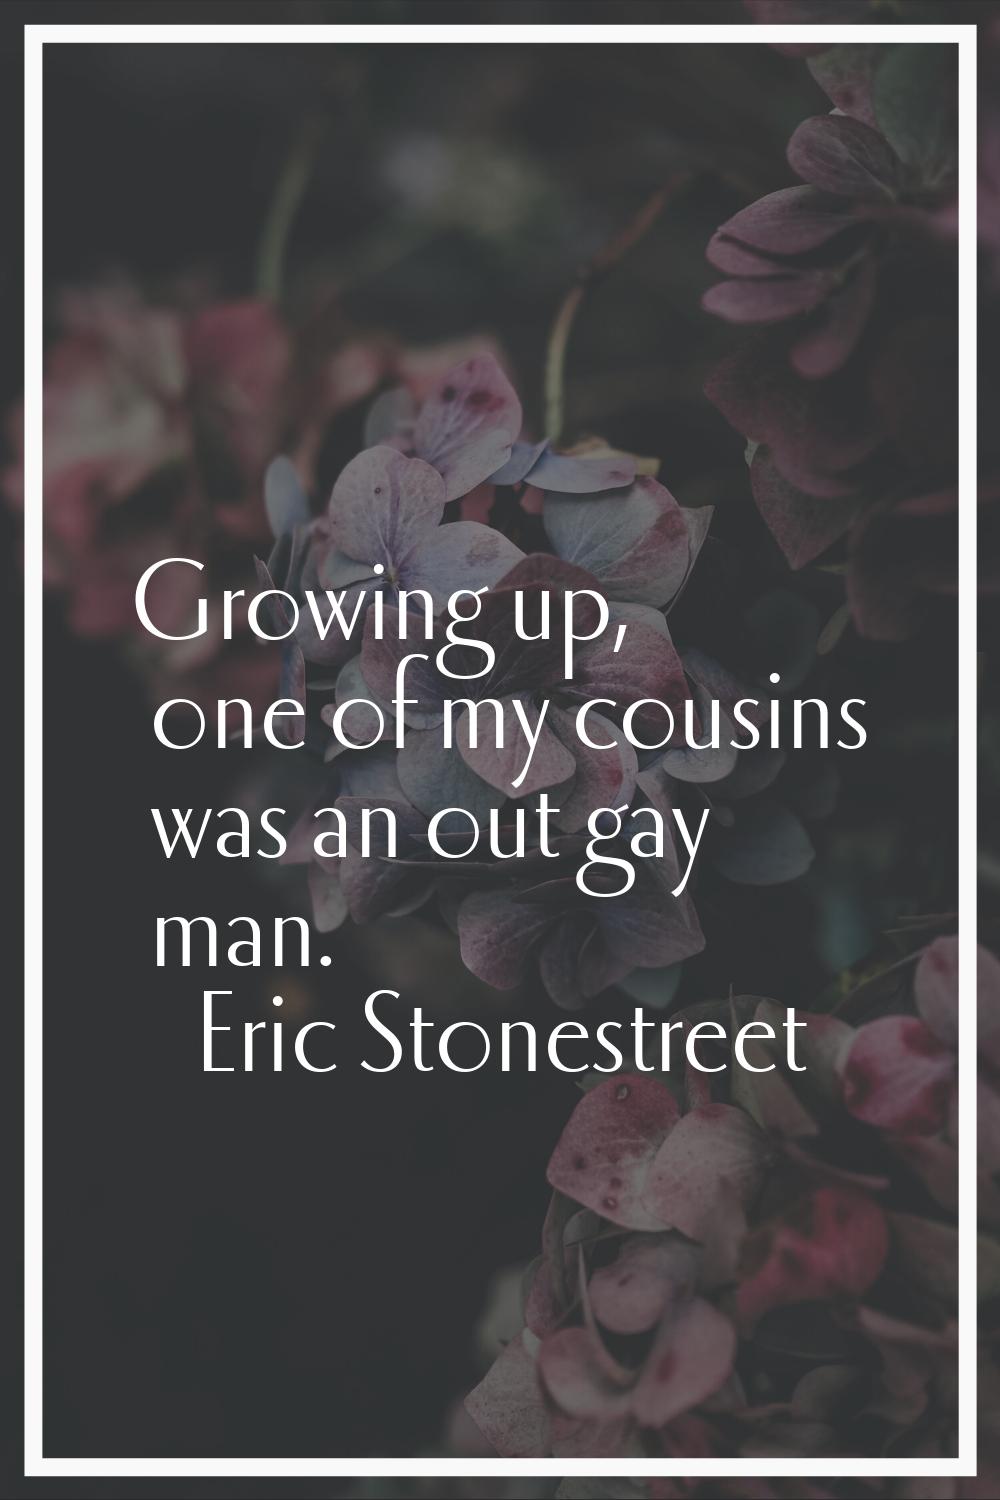 Growing up, one of my cousins was an out gay man.